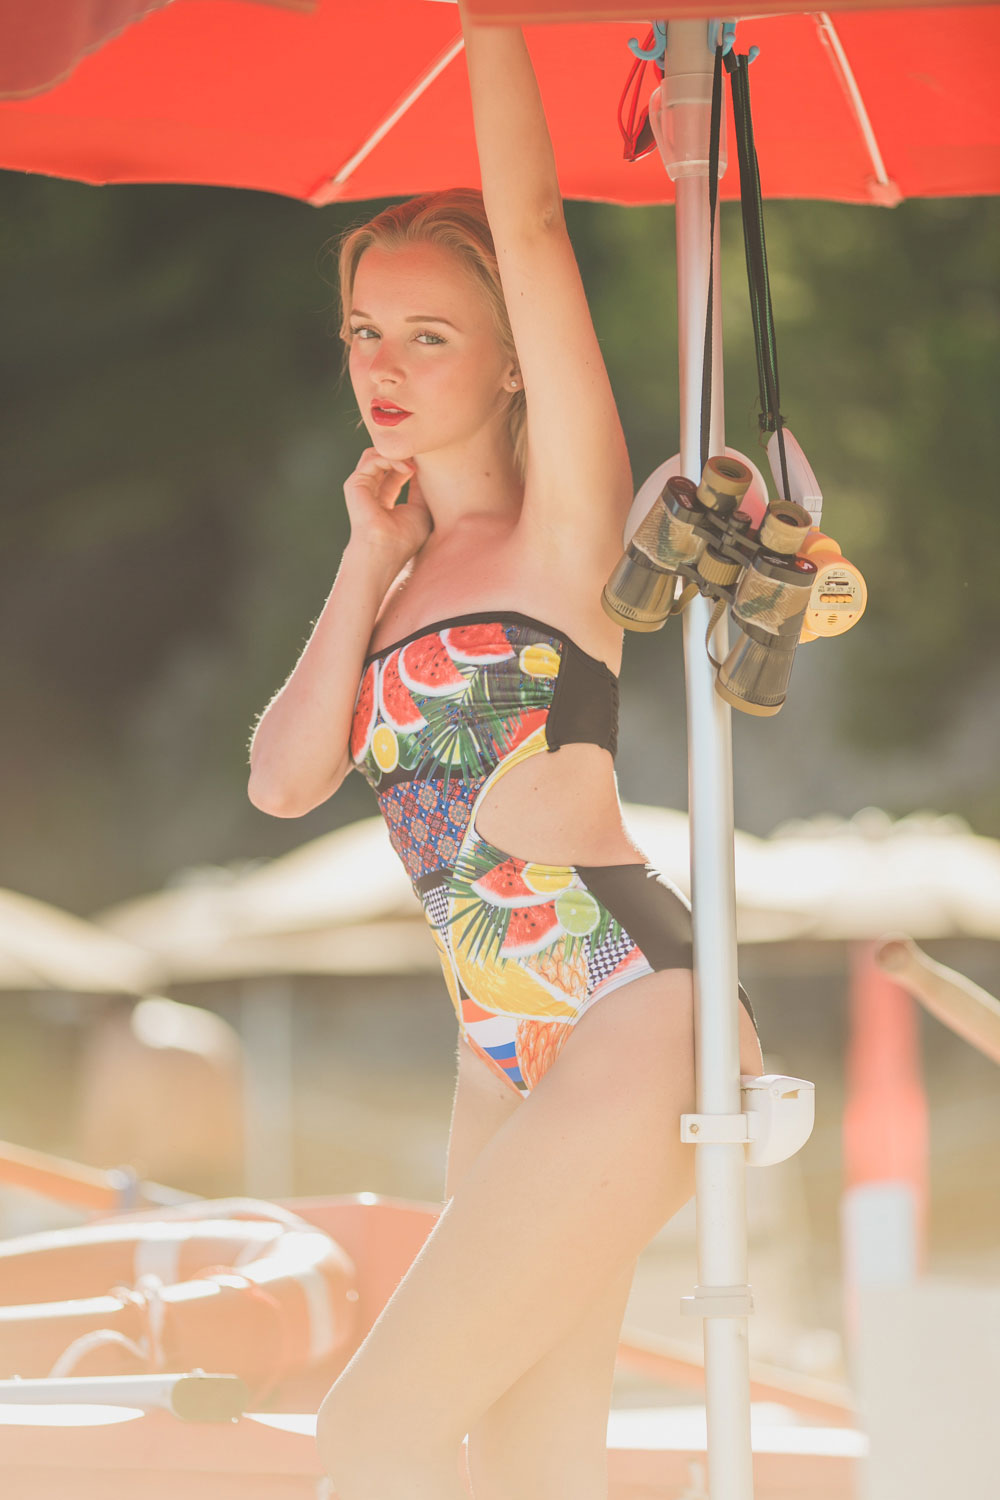 darya-kamalova-thecablook-fashion-lifestyle-blogger-from-thecablook-com-in-baia-dei-faraglioni-in-puglia-south-italy-wearing-river-island-watermelon-swimming-suit-and-lisp-sunglasses-3553